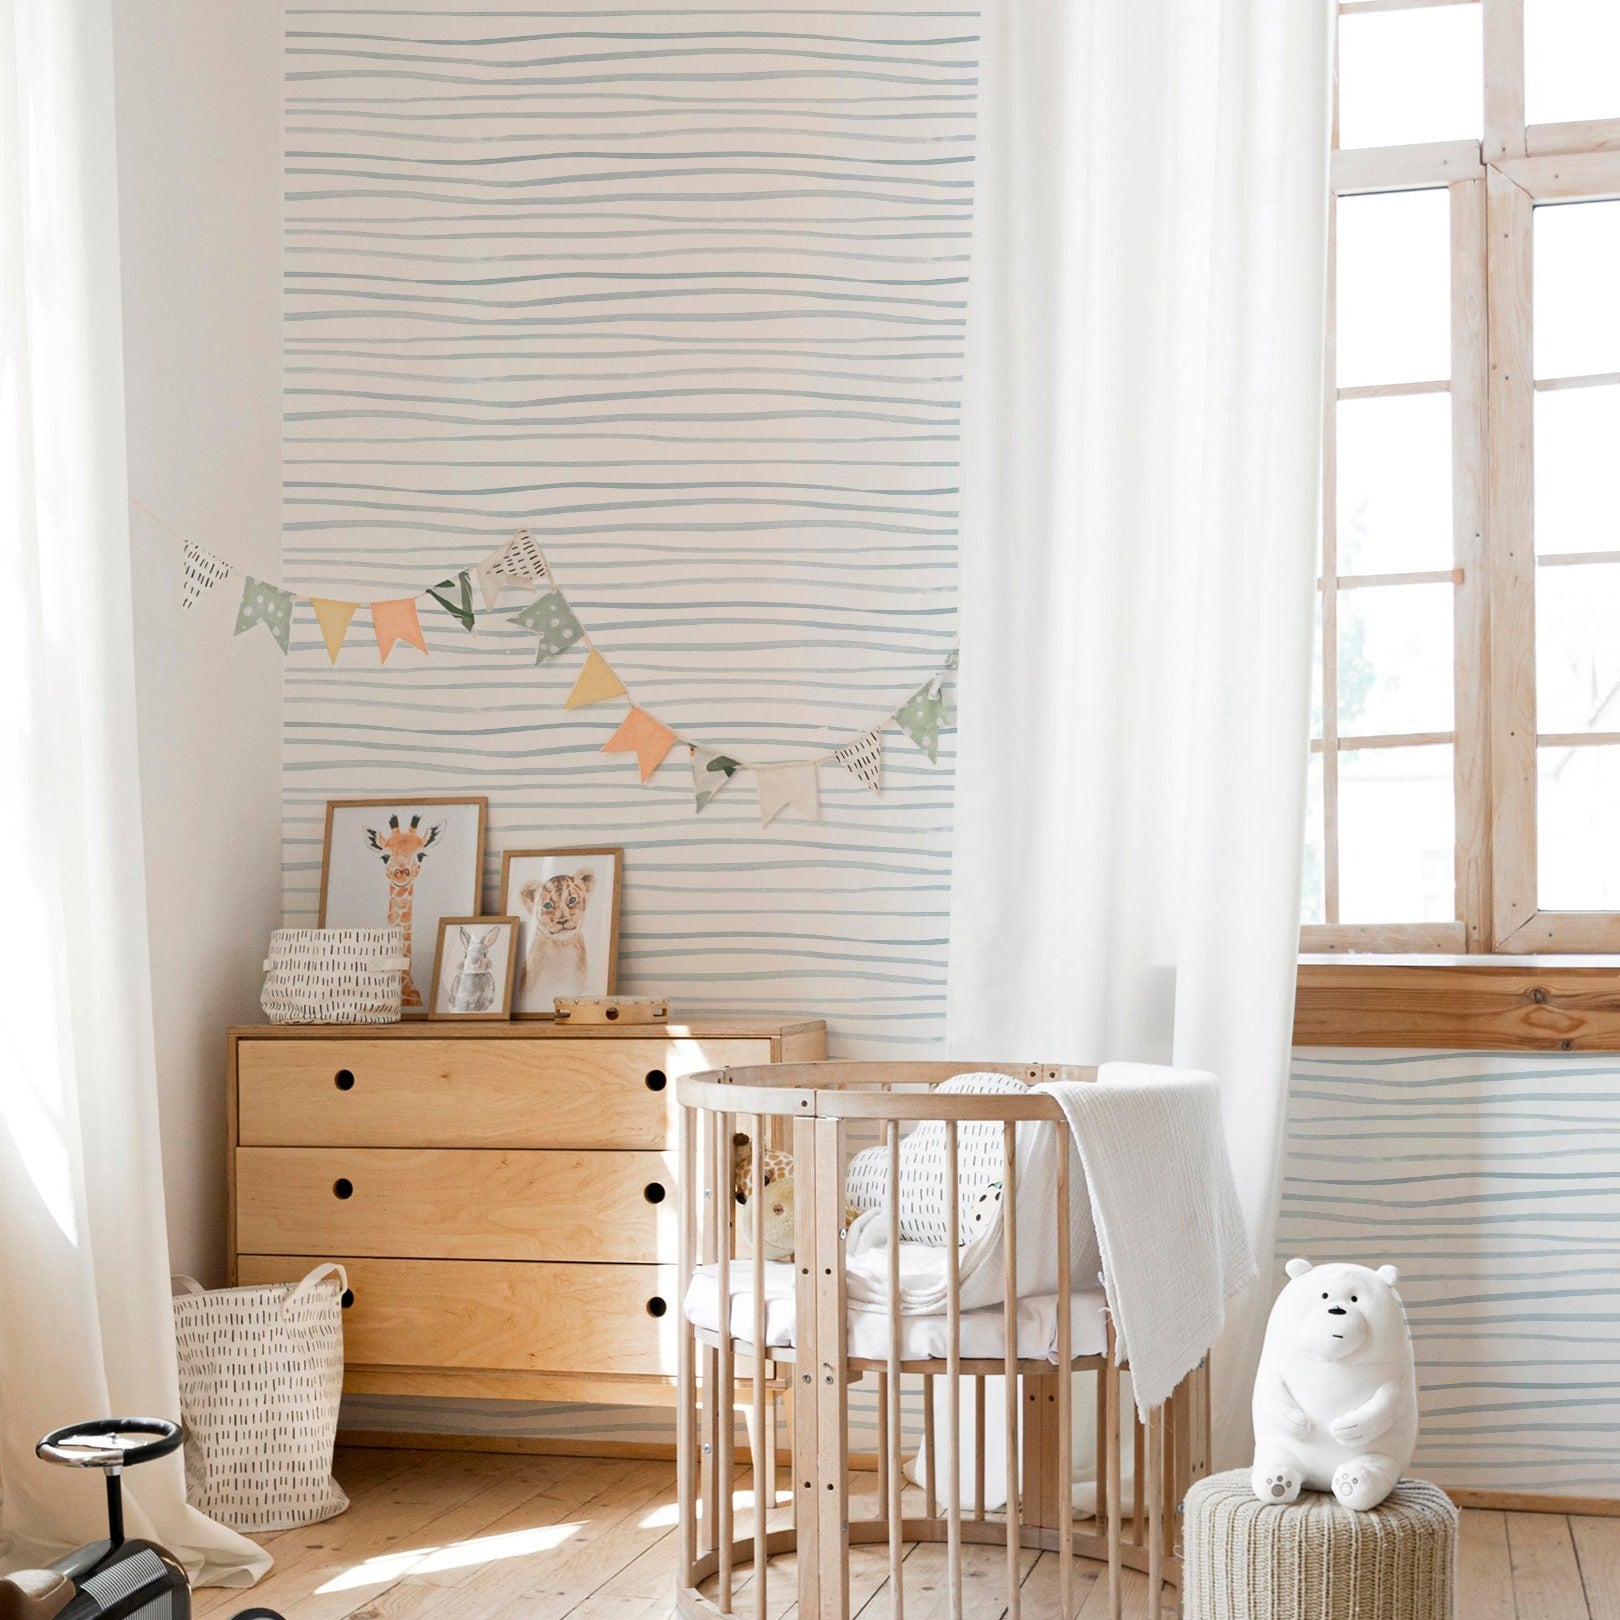 A cozy nursery with wooden furniture and soft lighting, decorated with wallpaper featuring minimalistic blue brush stroke lines, creating a serene and inviting atmosphere.